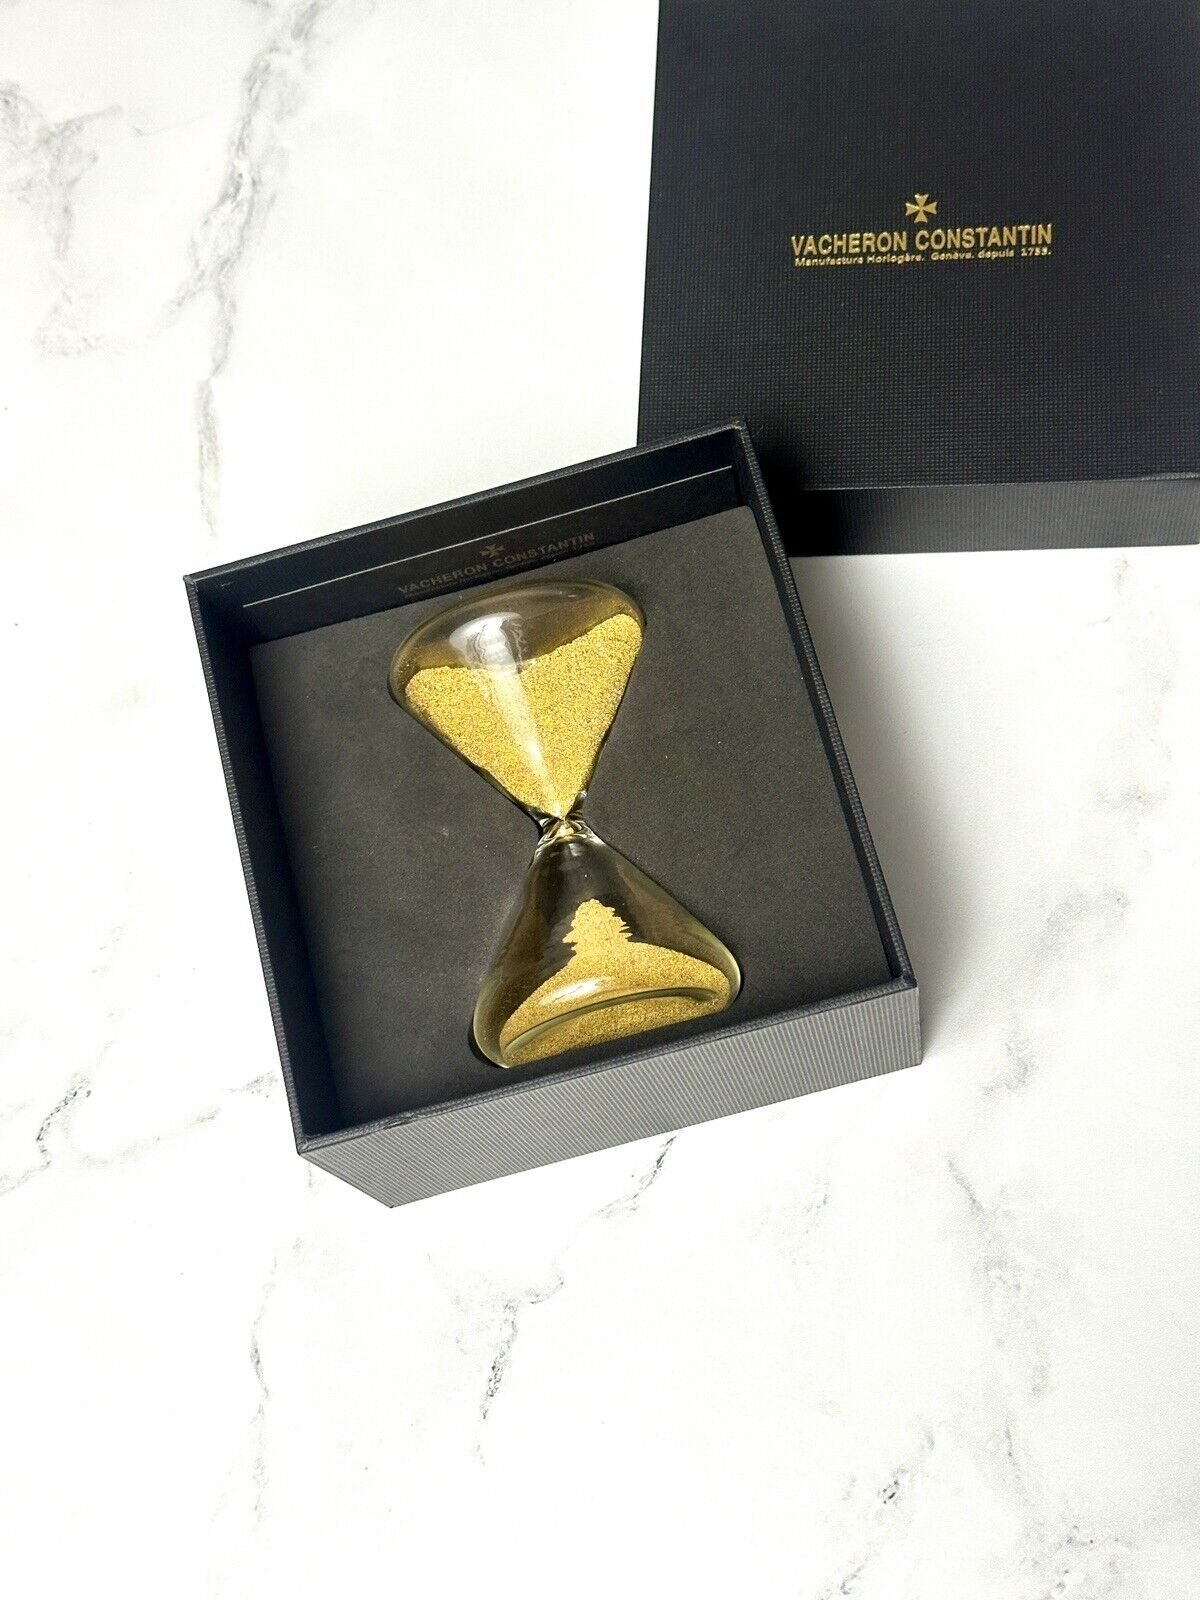 Vacheron Constantin Hourglass Limited Edition AD VIP Gift